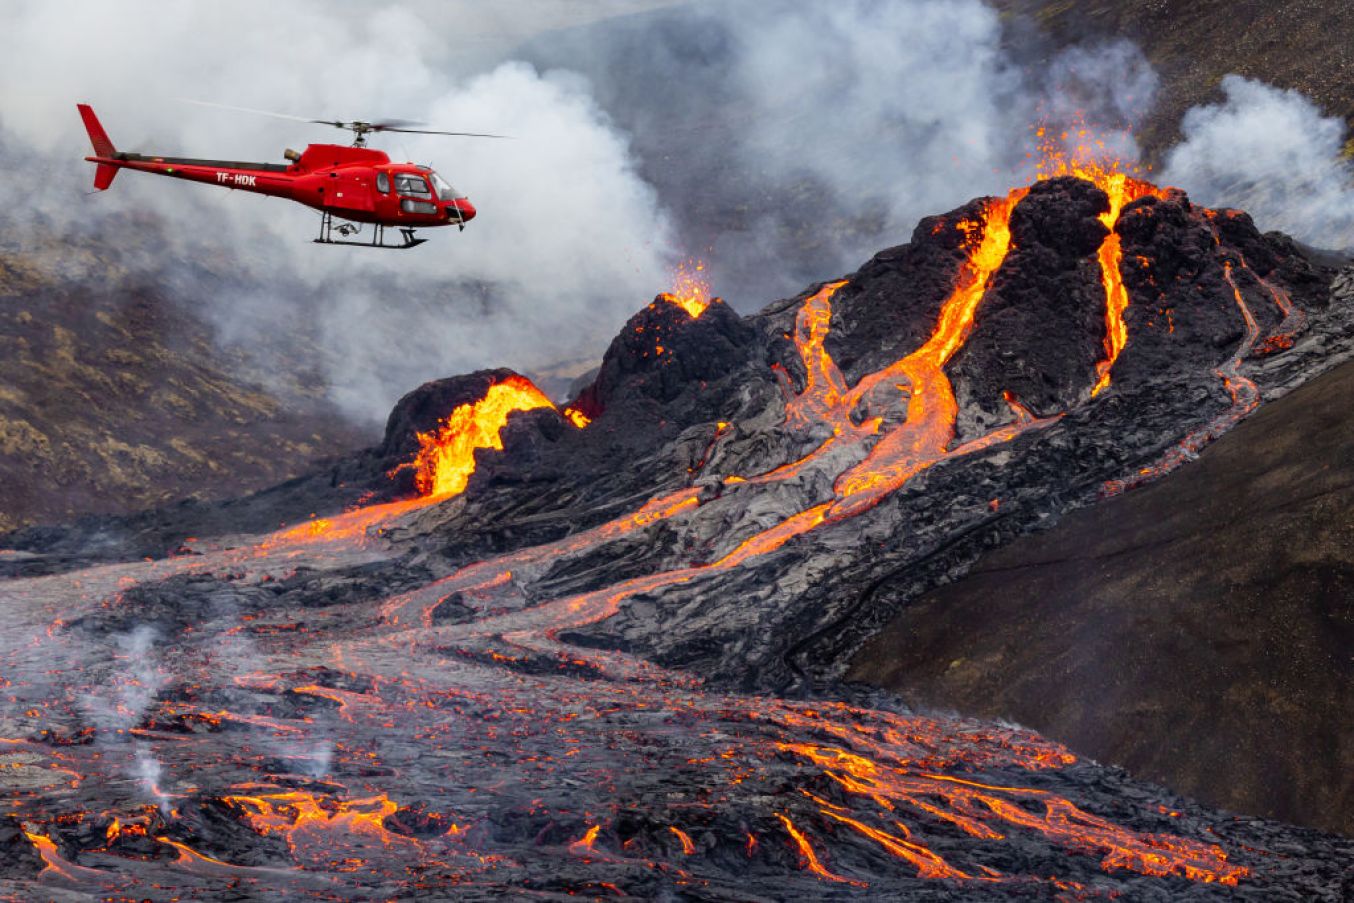 A Helicopter Flies Close To The Eruption. (Photo By Vilhelm Gunnarsson/Getty Images)